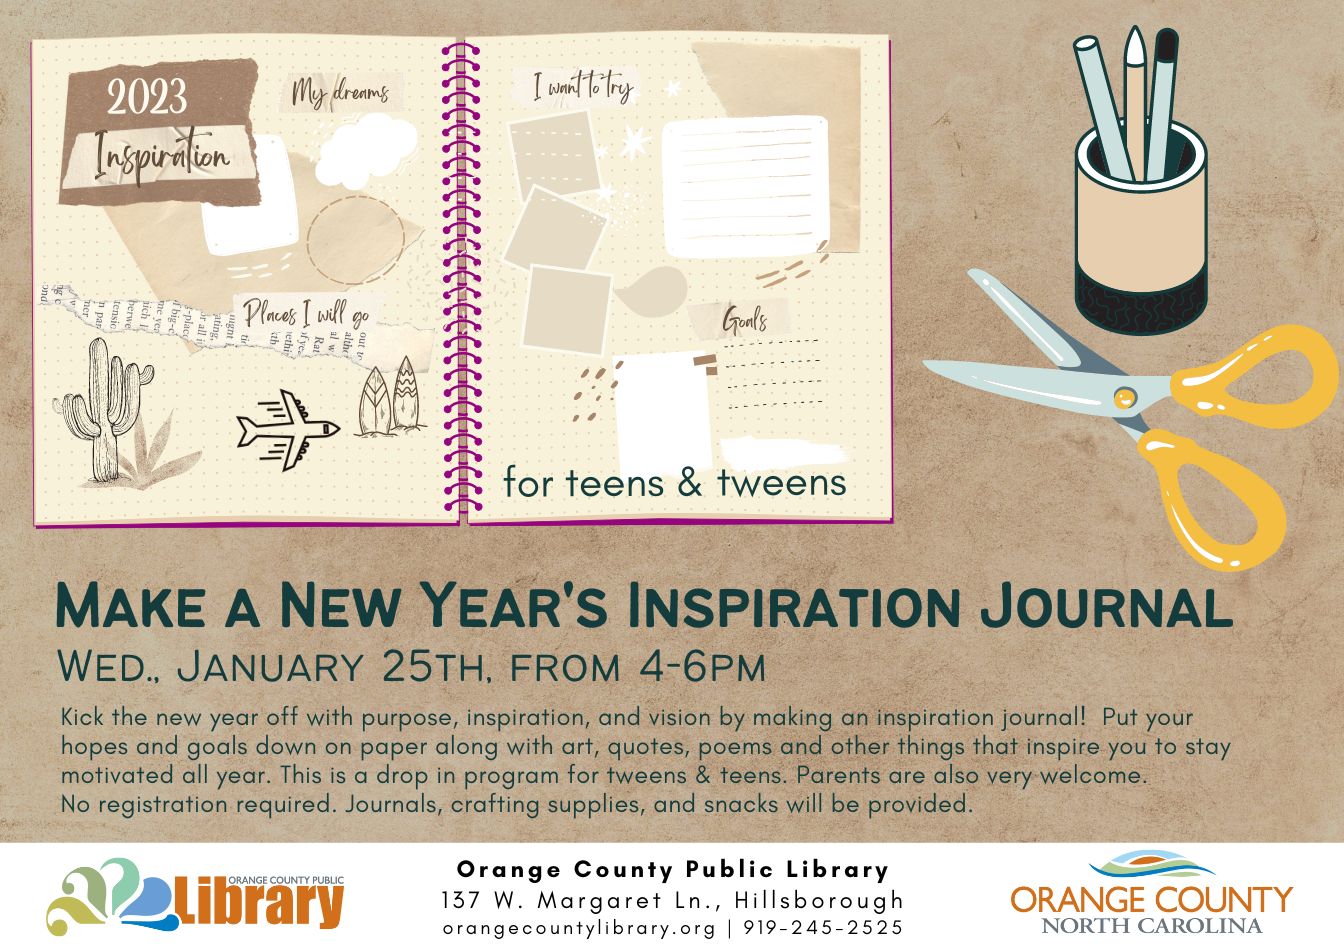 Kick the new year off with purpose, inspiration, and vision by making an inspiration journal!  Put your hopes and goals down on paper along with art, quotes, poems and other things that inspire you to stay motivated all year. This is a drop in program for tweens & teens. Parents are also very welcome.  No registration required. Journals, crafting supplies, and snacks will be provided.